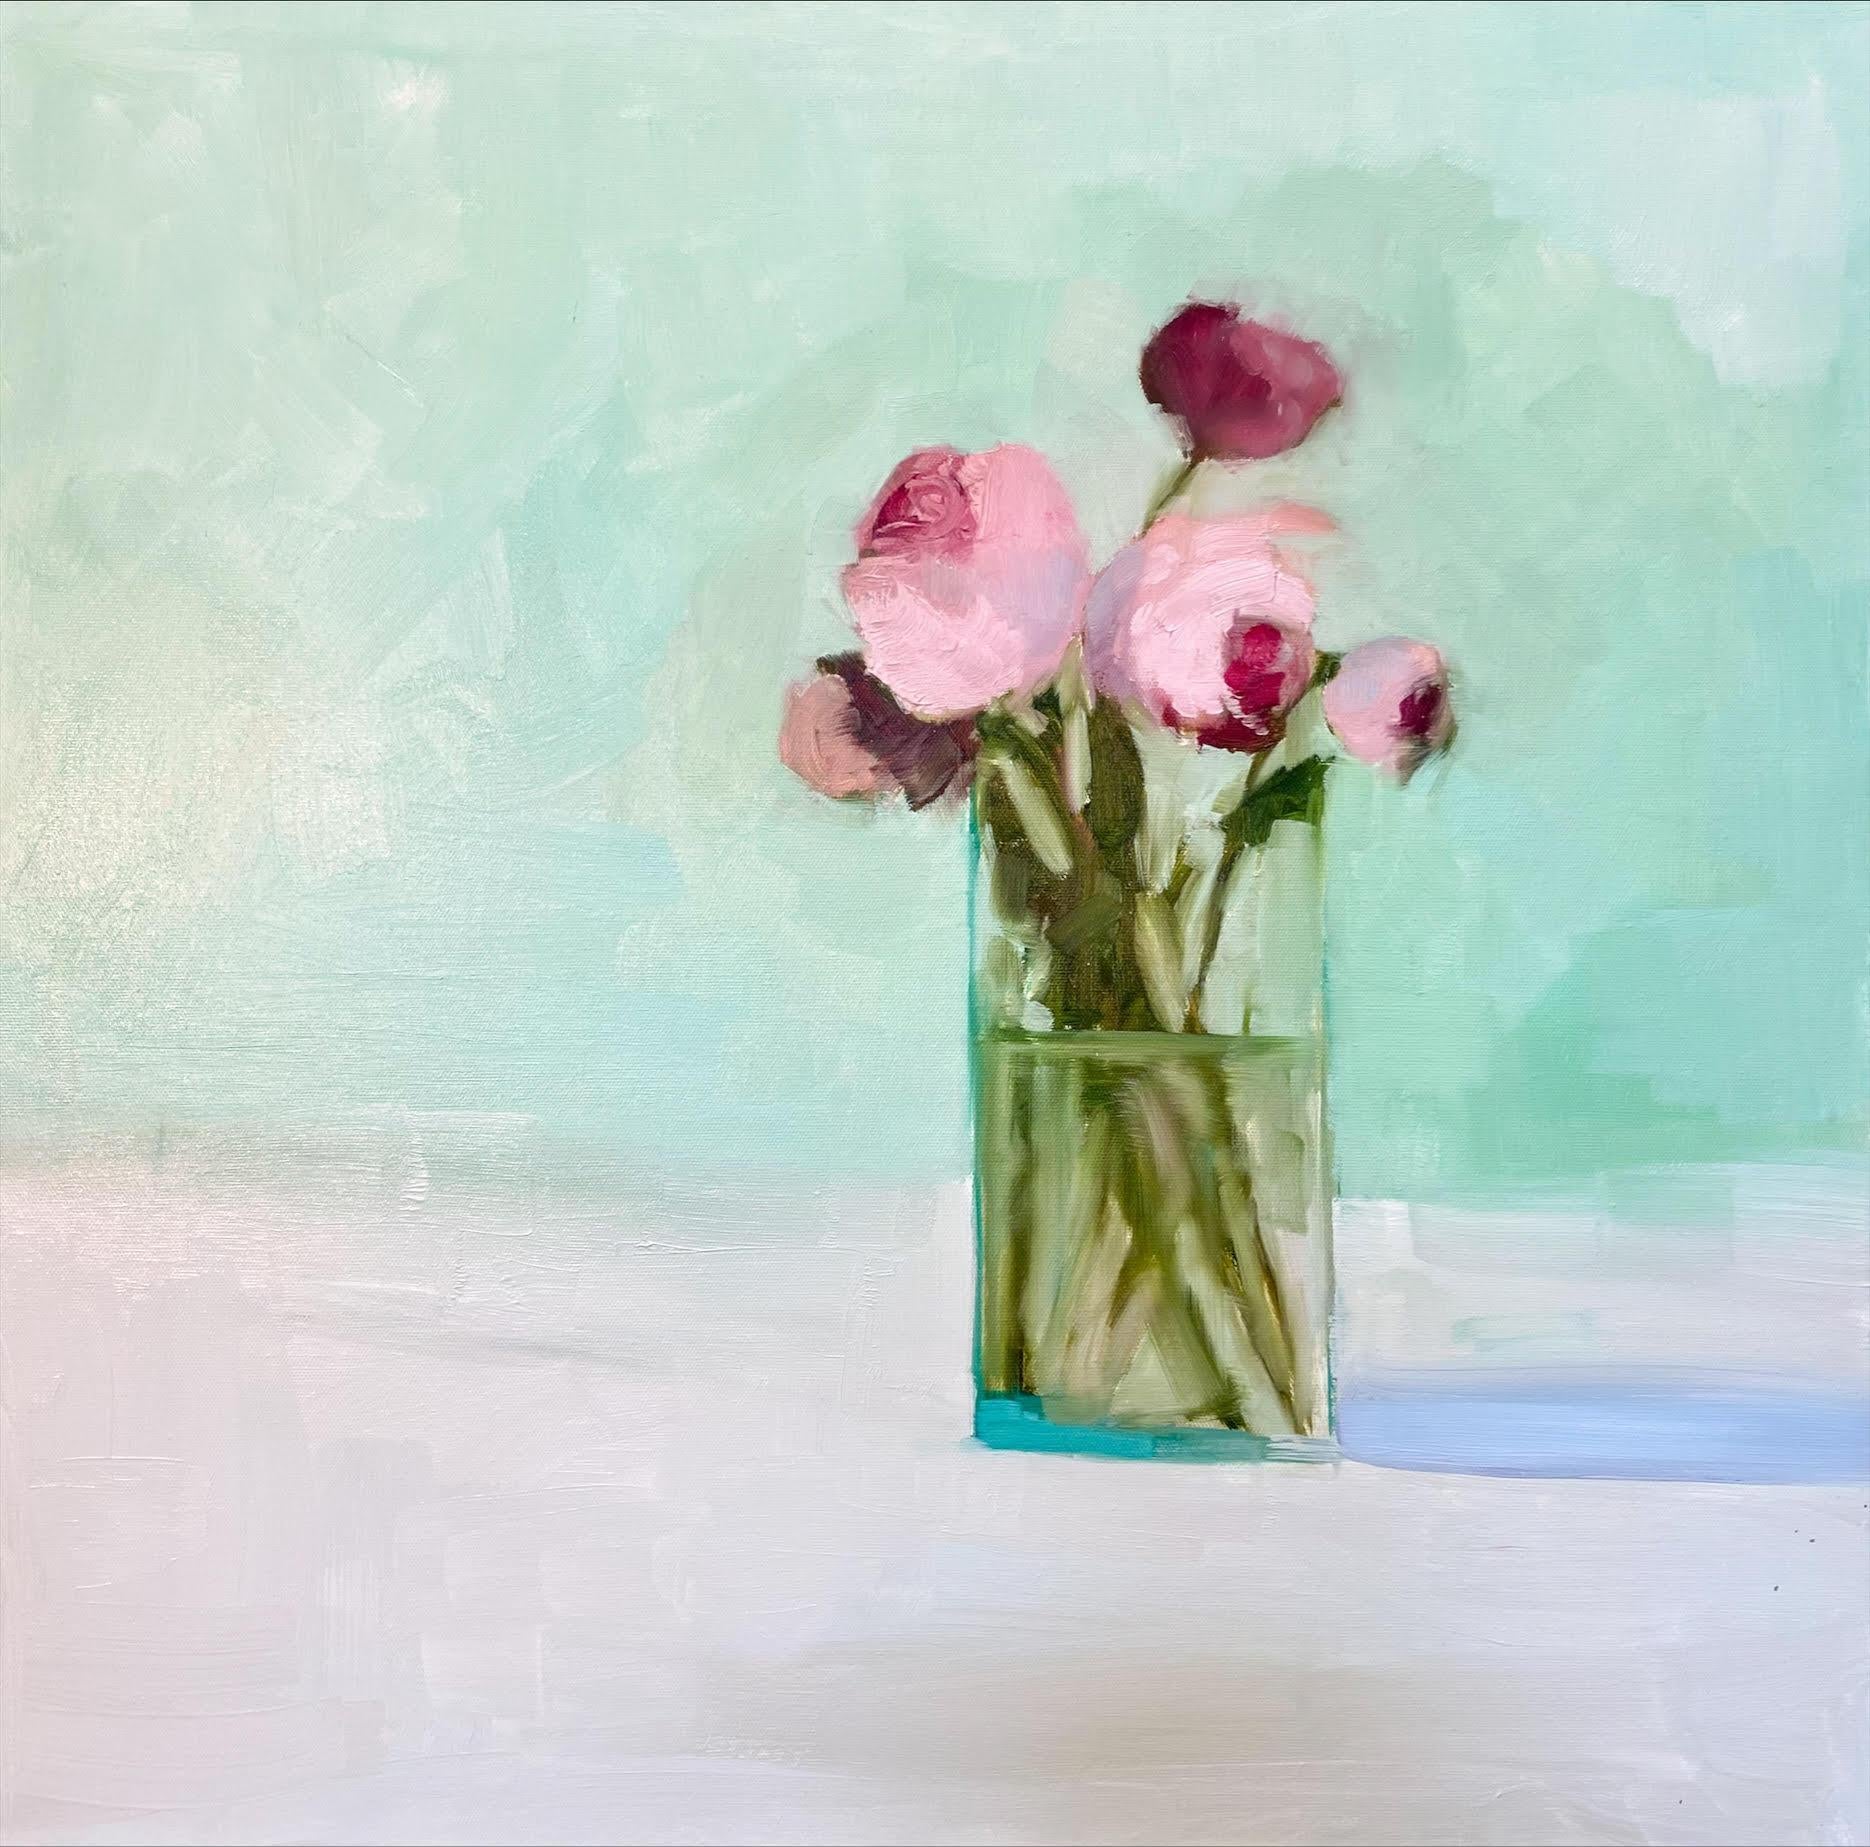 Jill Matthews Figurative Painting - "Pink Garden Roses" Oil painting of pink and red roses in a glass vase. 